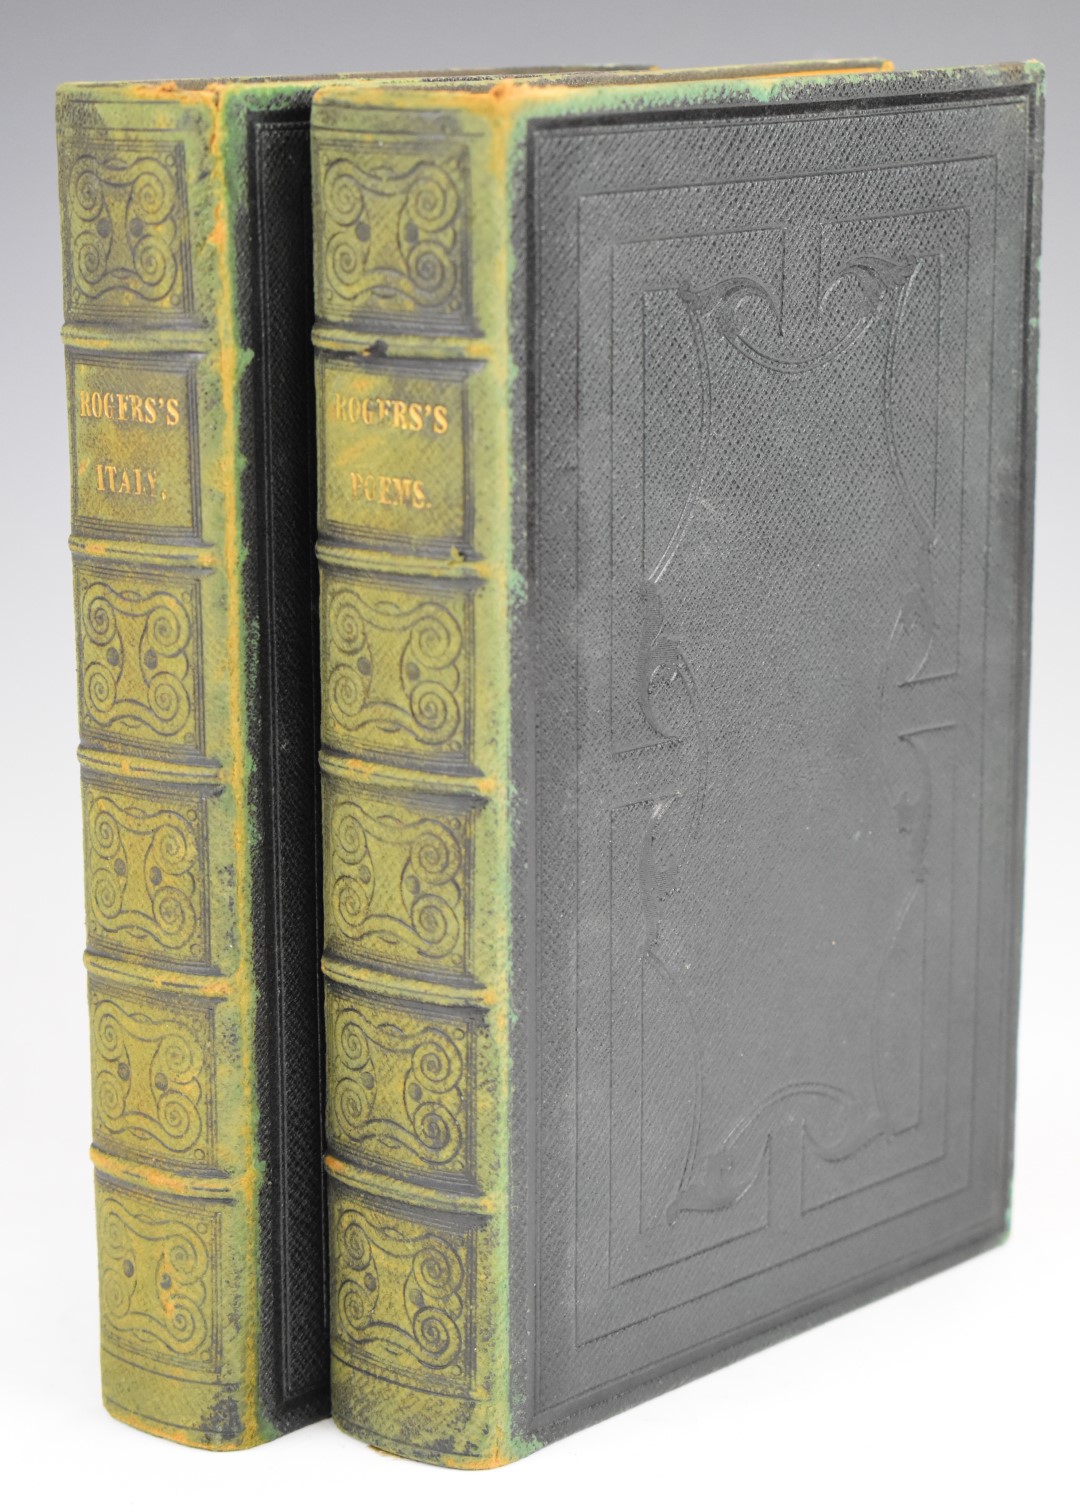 Samuel Rogers Poems and Italy, A Poem printed for T. Cadell, Strand etc 1830 & 1834 in two volumes